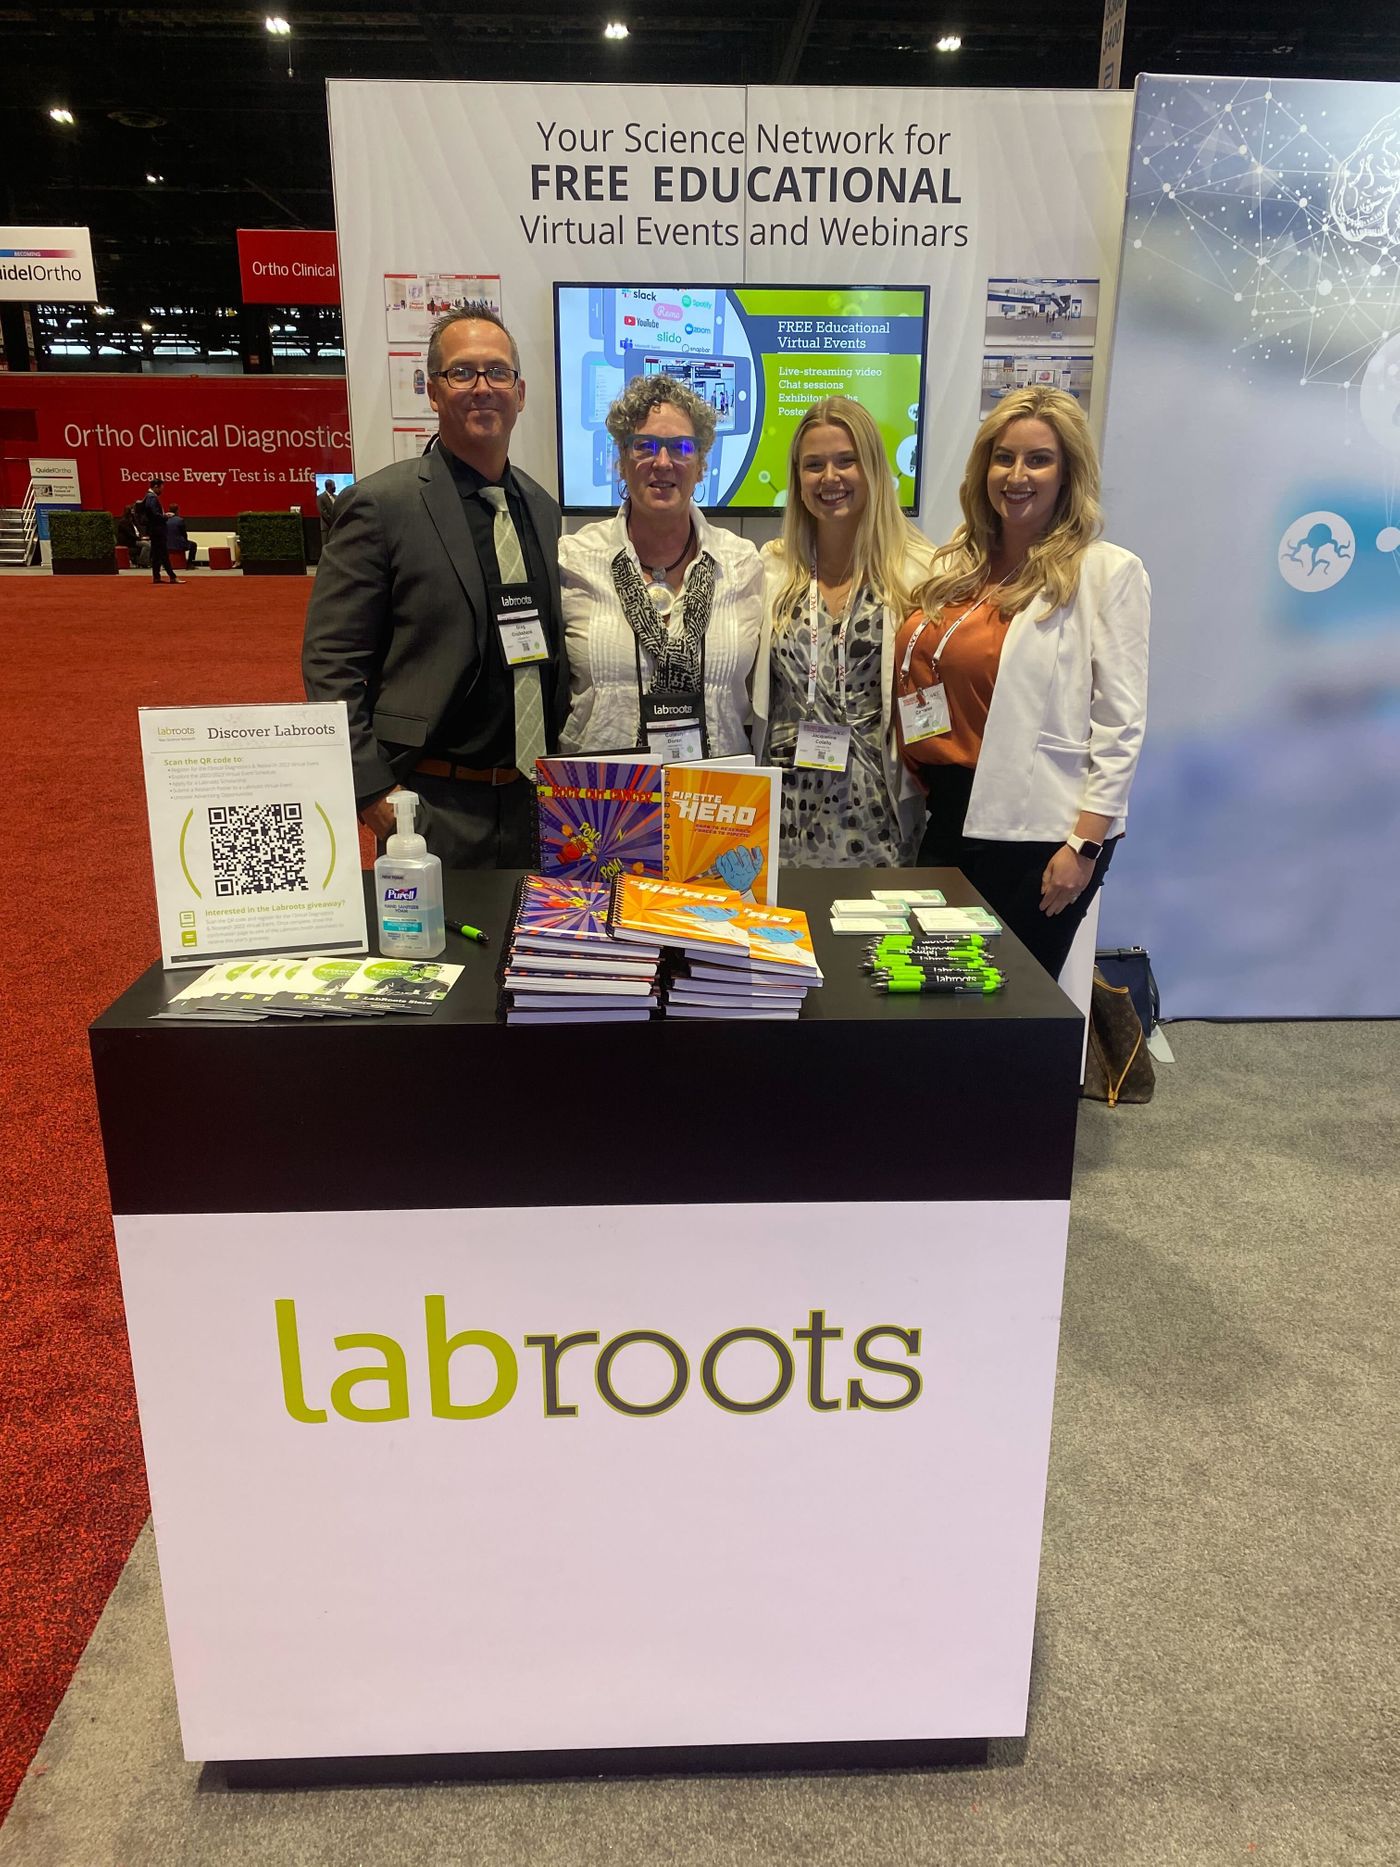 The Labroots team at the 2022 AACC Annual Meeting